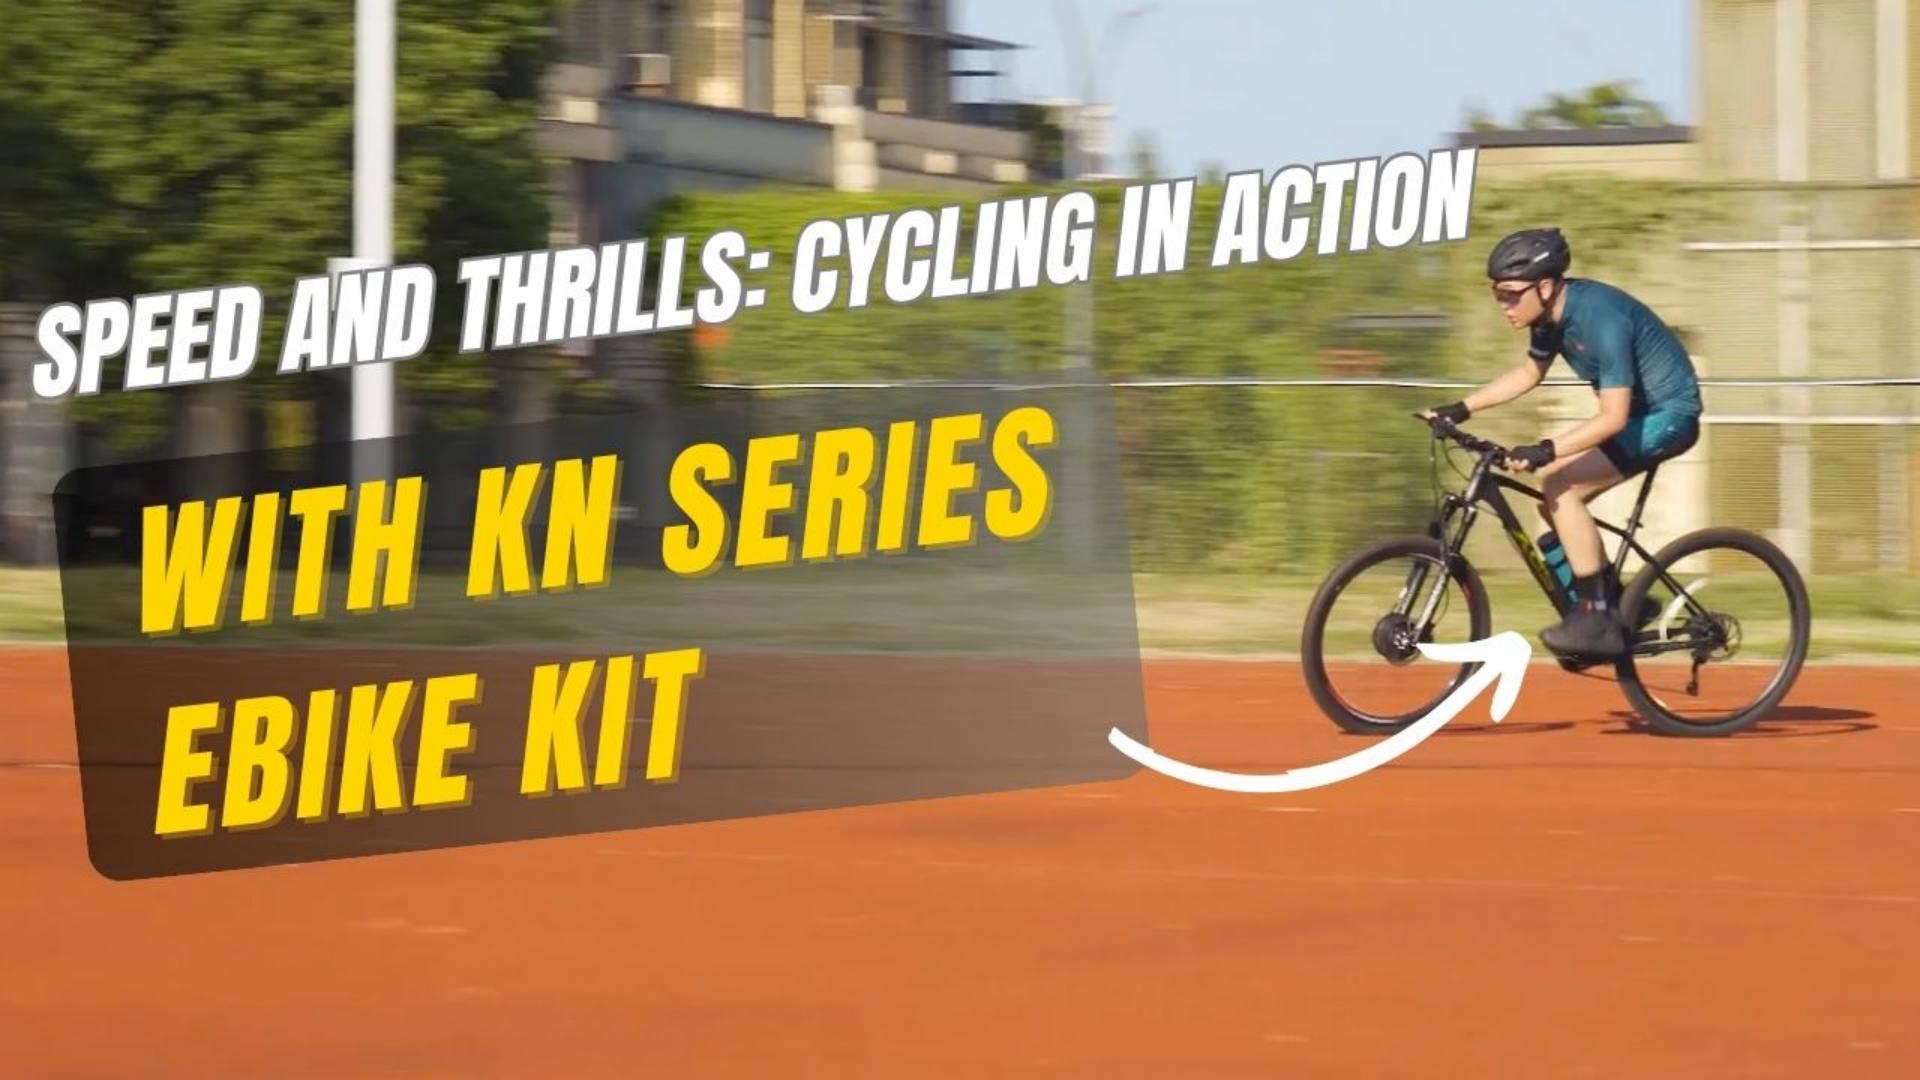 KN Bottle battery ebike kit// Speed and Thrills: Cycling in Action